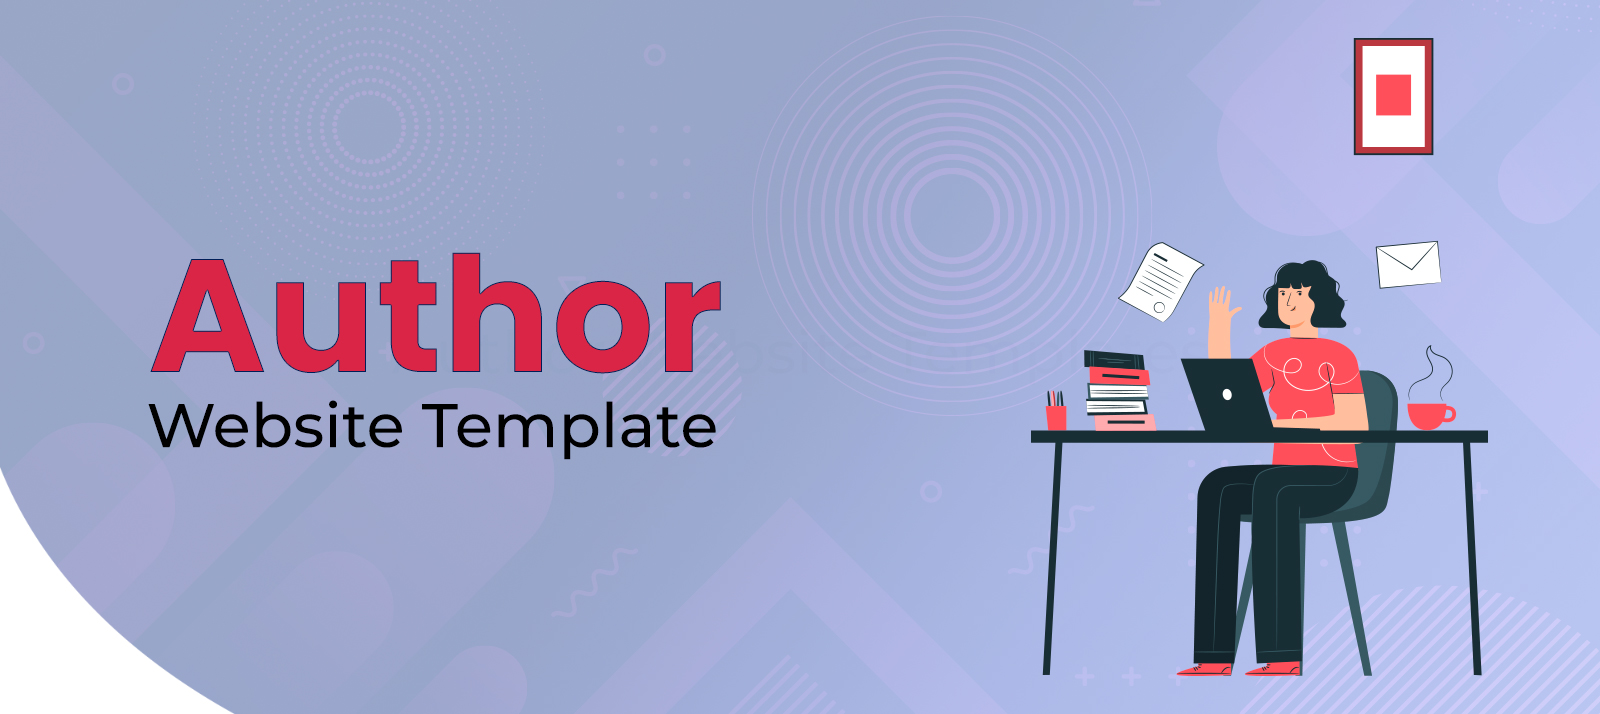  New and Ready To Use Website Templates and WordPress Themes For Authors